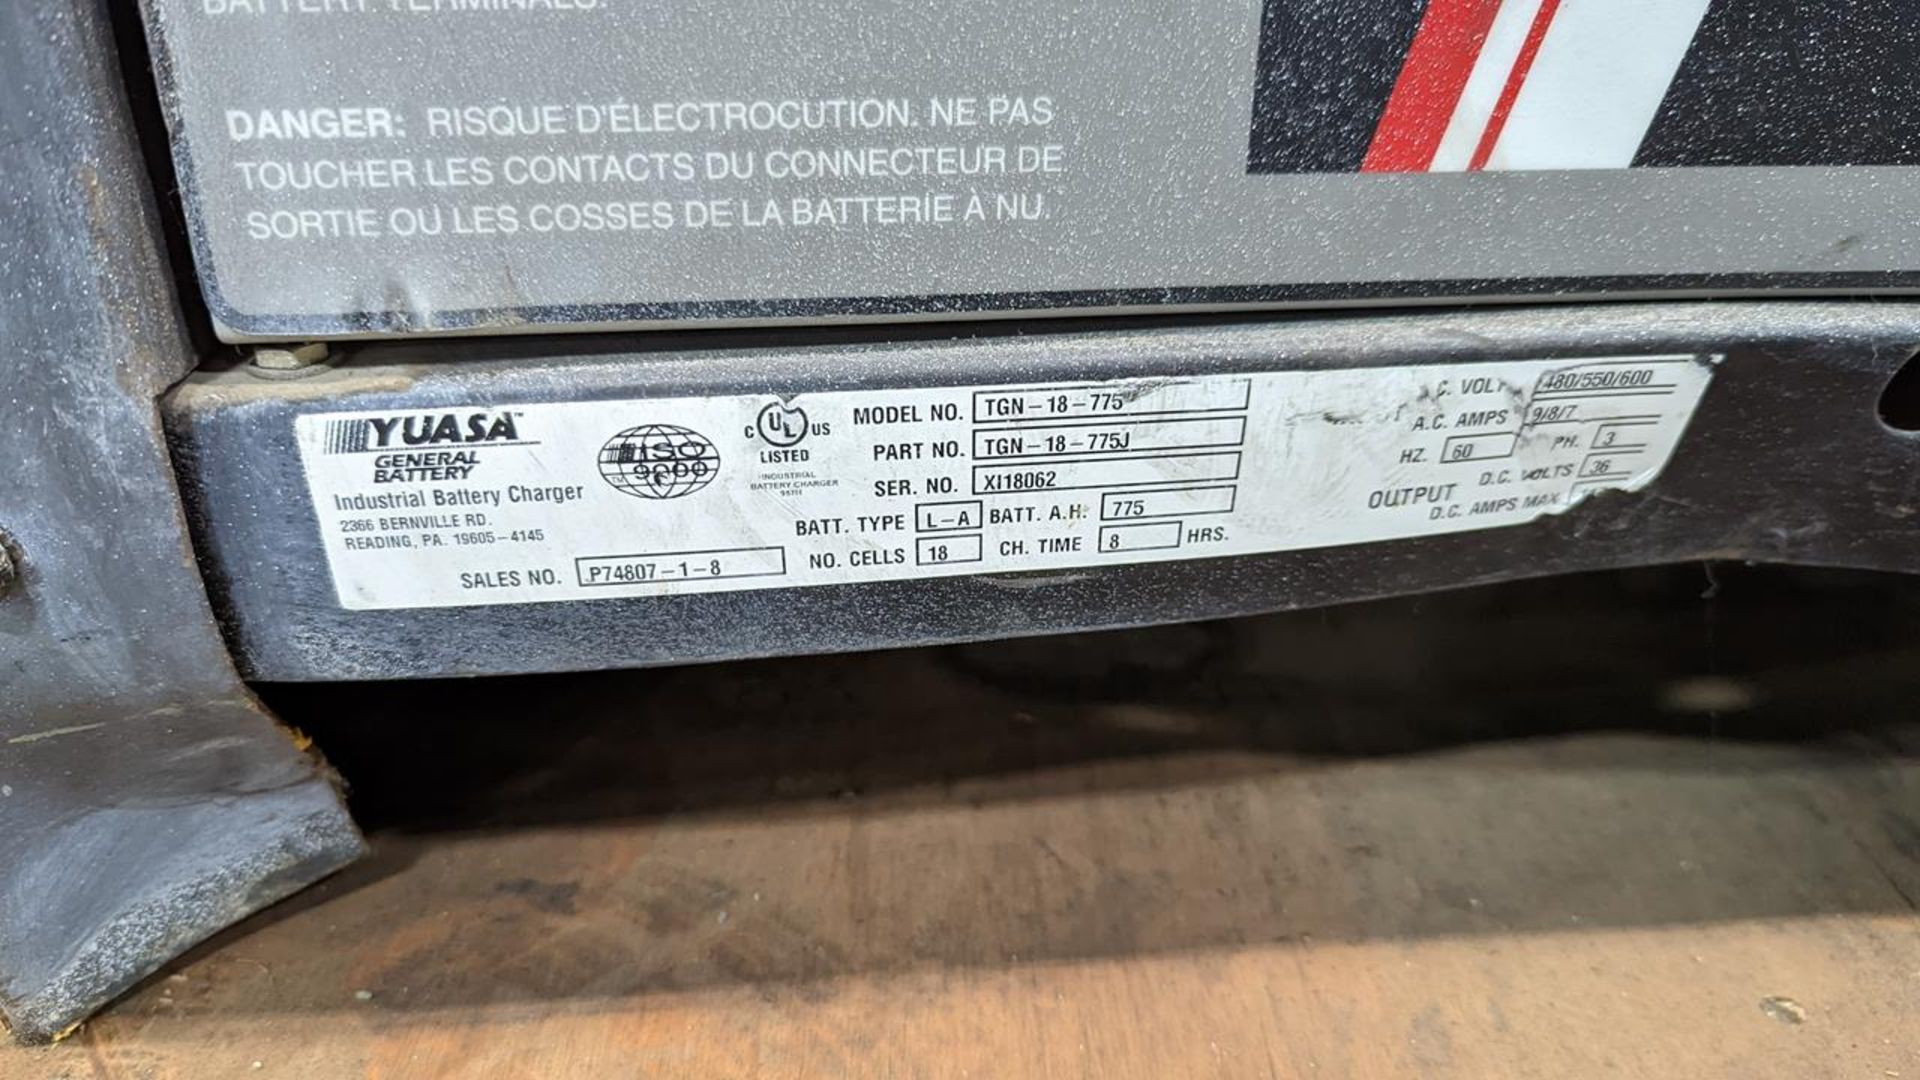 GENERAL BATTERY (YUASA), TG-18-775, 36 VOLT, 775 AMP HOURS, BATTERY CHARGER, 480/550/600 INFEED - Image 3 of 3